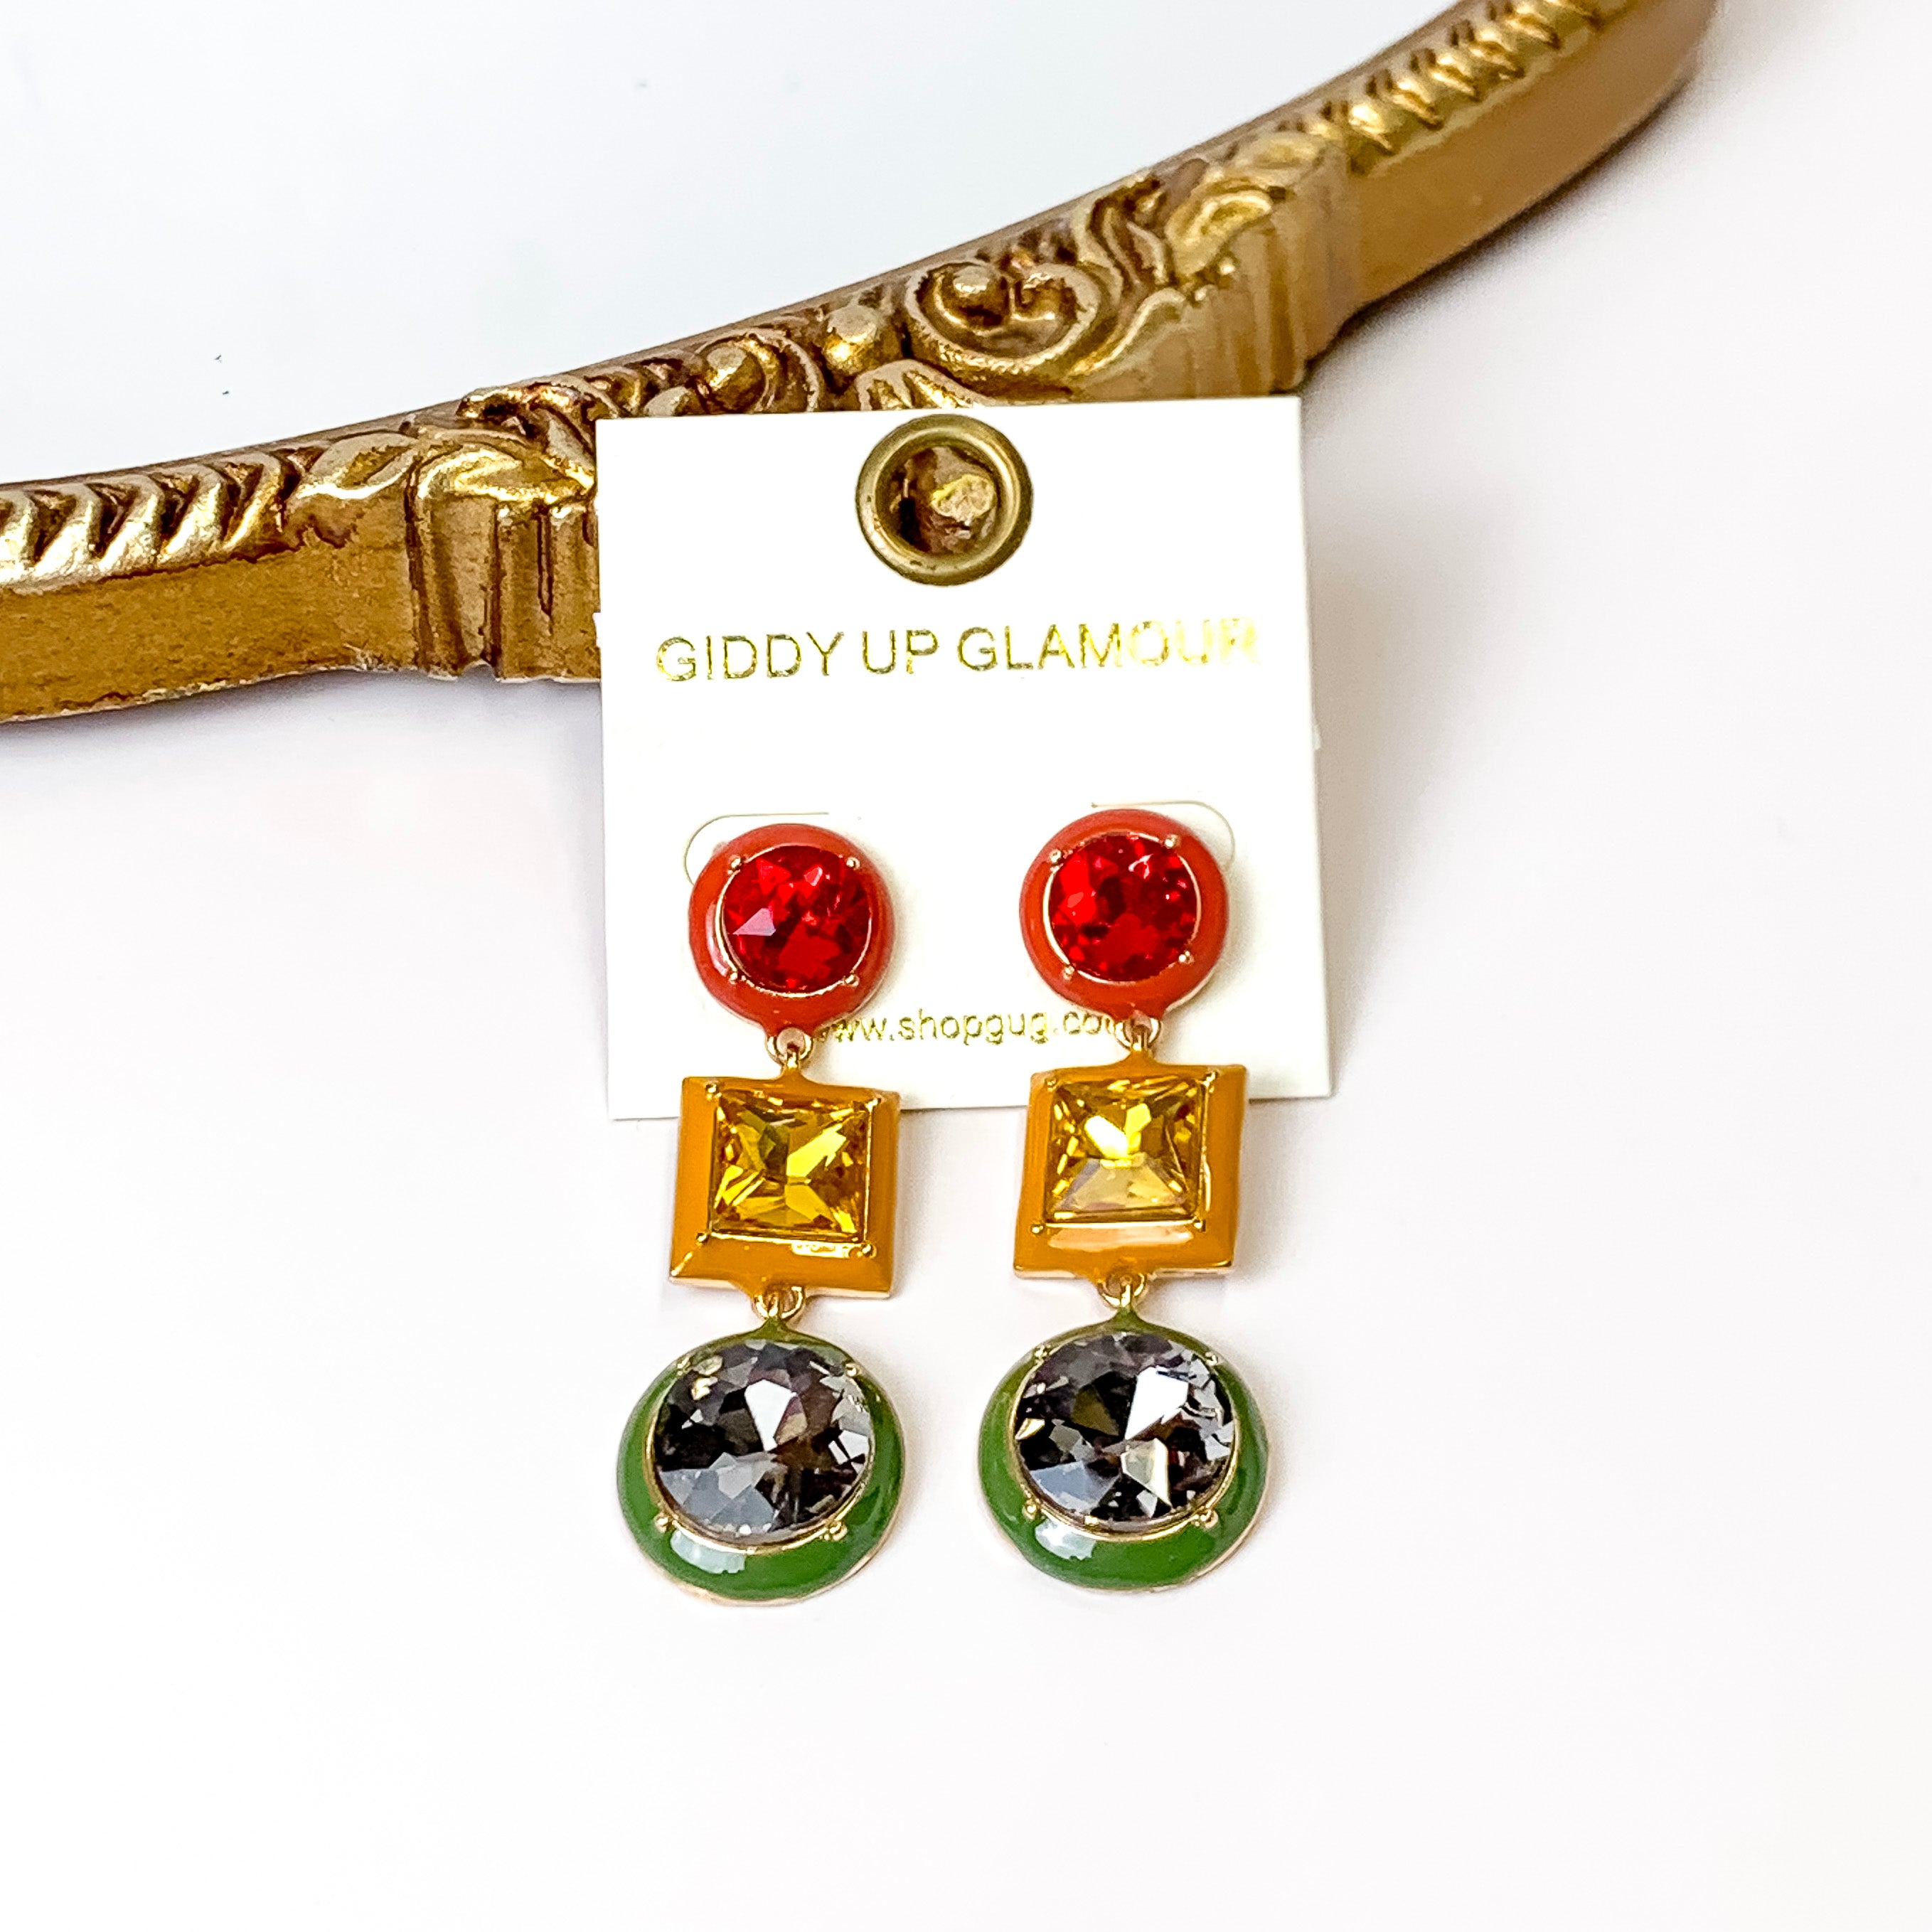 3 Tier Multicolor Enamel Drop Earrings in Red/Yellow/Green - Giddy Up Glamour Boutique